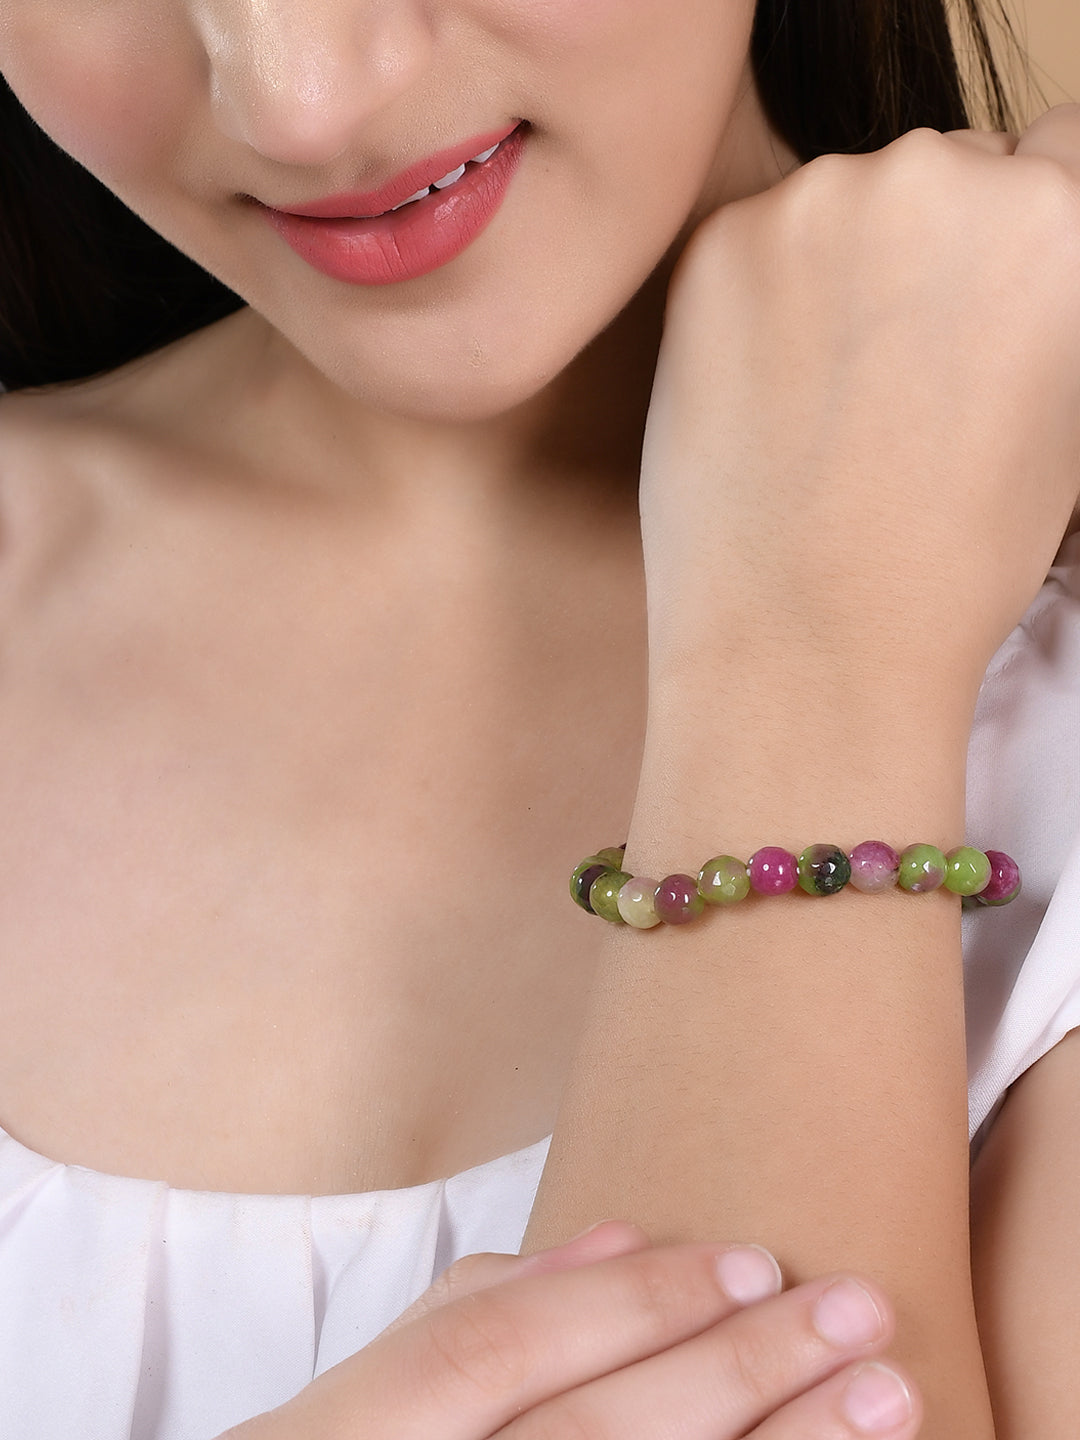 Artificial Beads Natural Stone beaded Bracelet